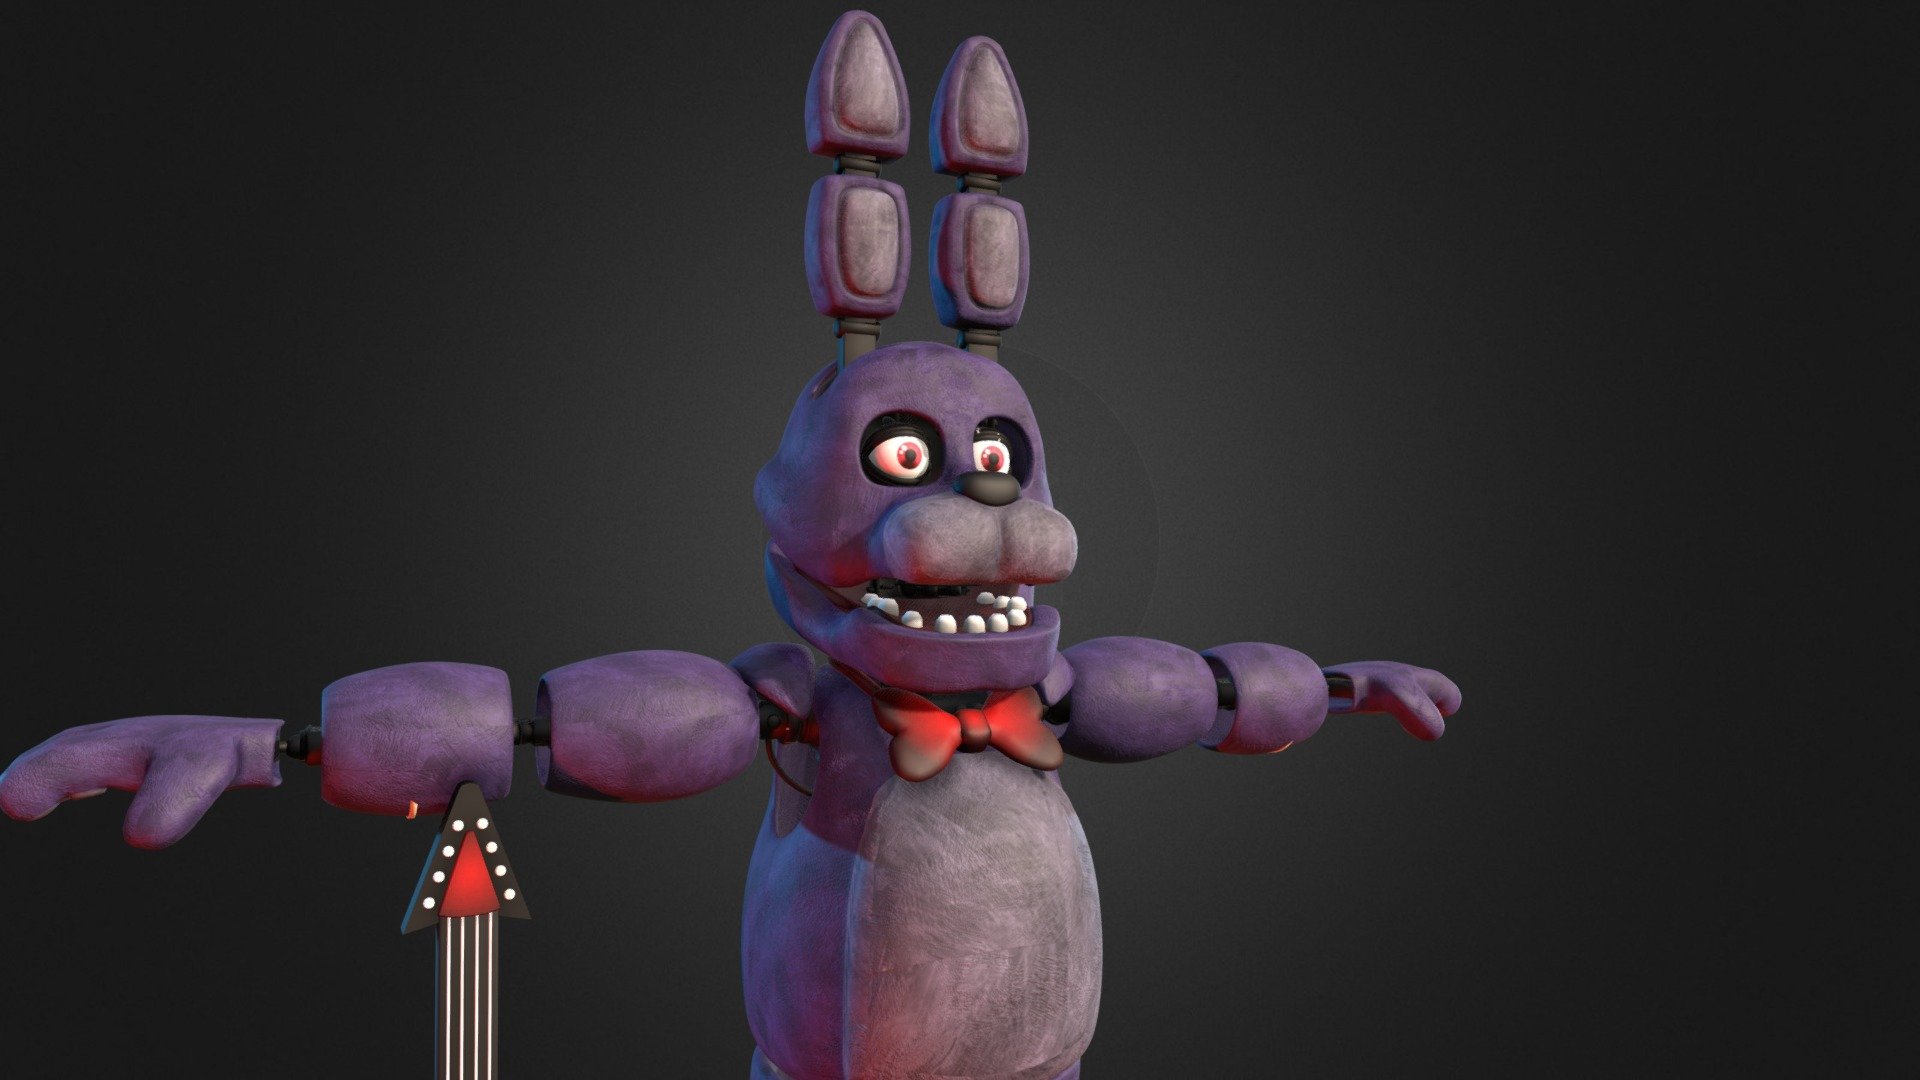 FNaF 1 Bonnie by Thudner - Download Free 3D model by DillonXtrullier_21  (@DillonXtrullier_21) [be1b2aa]